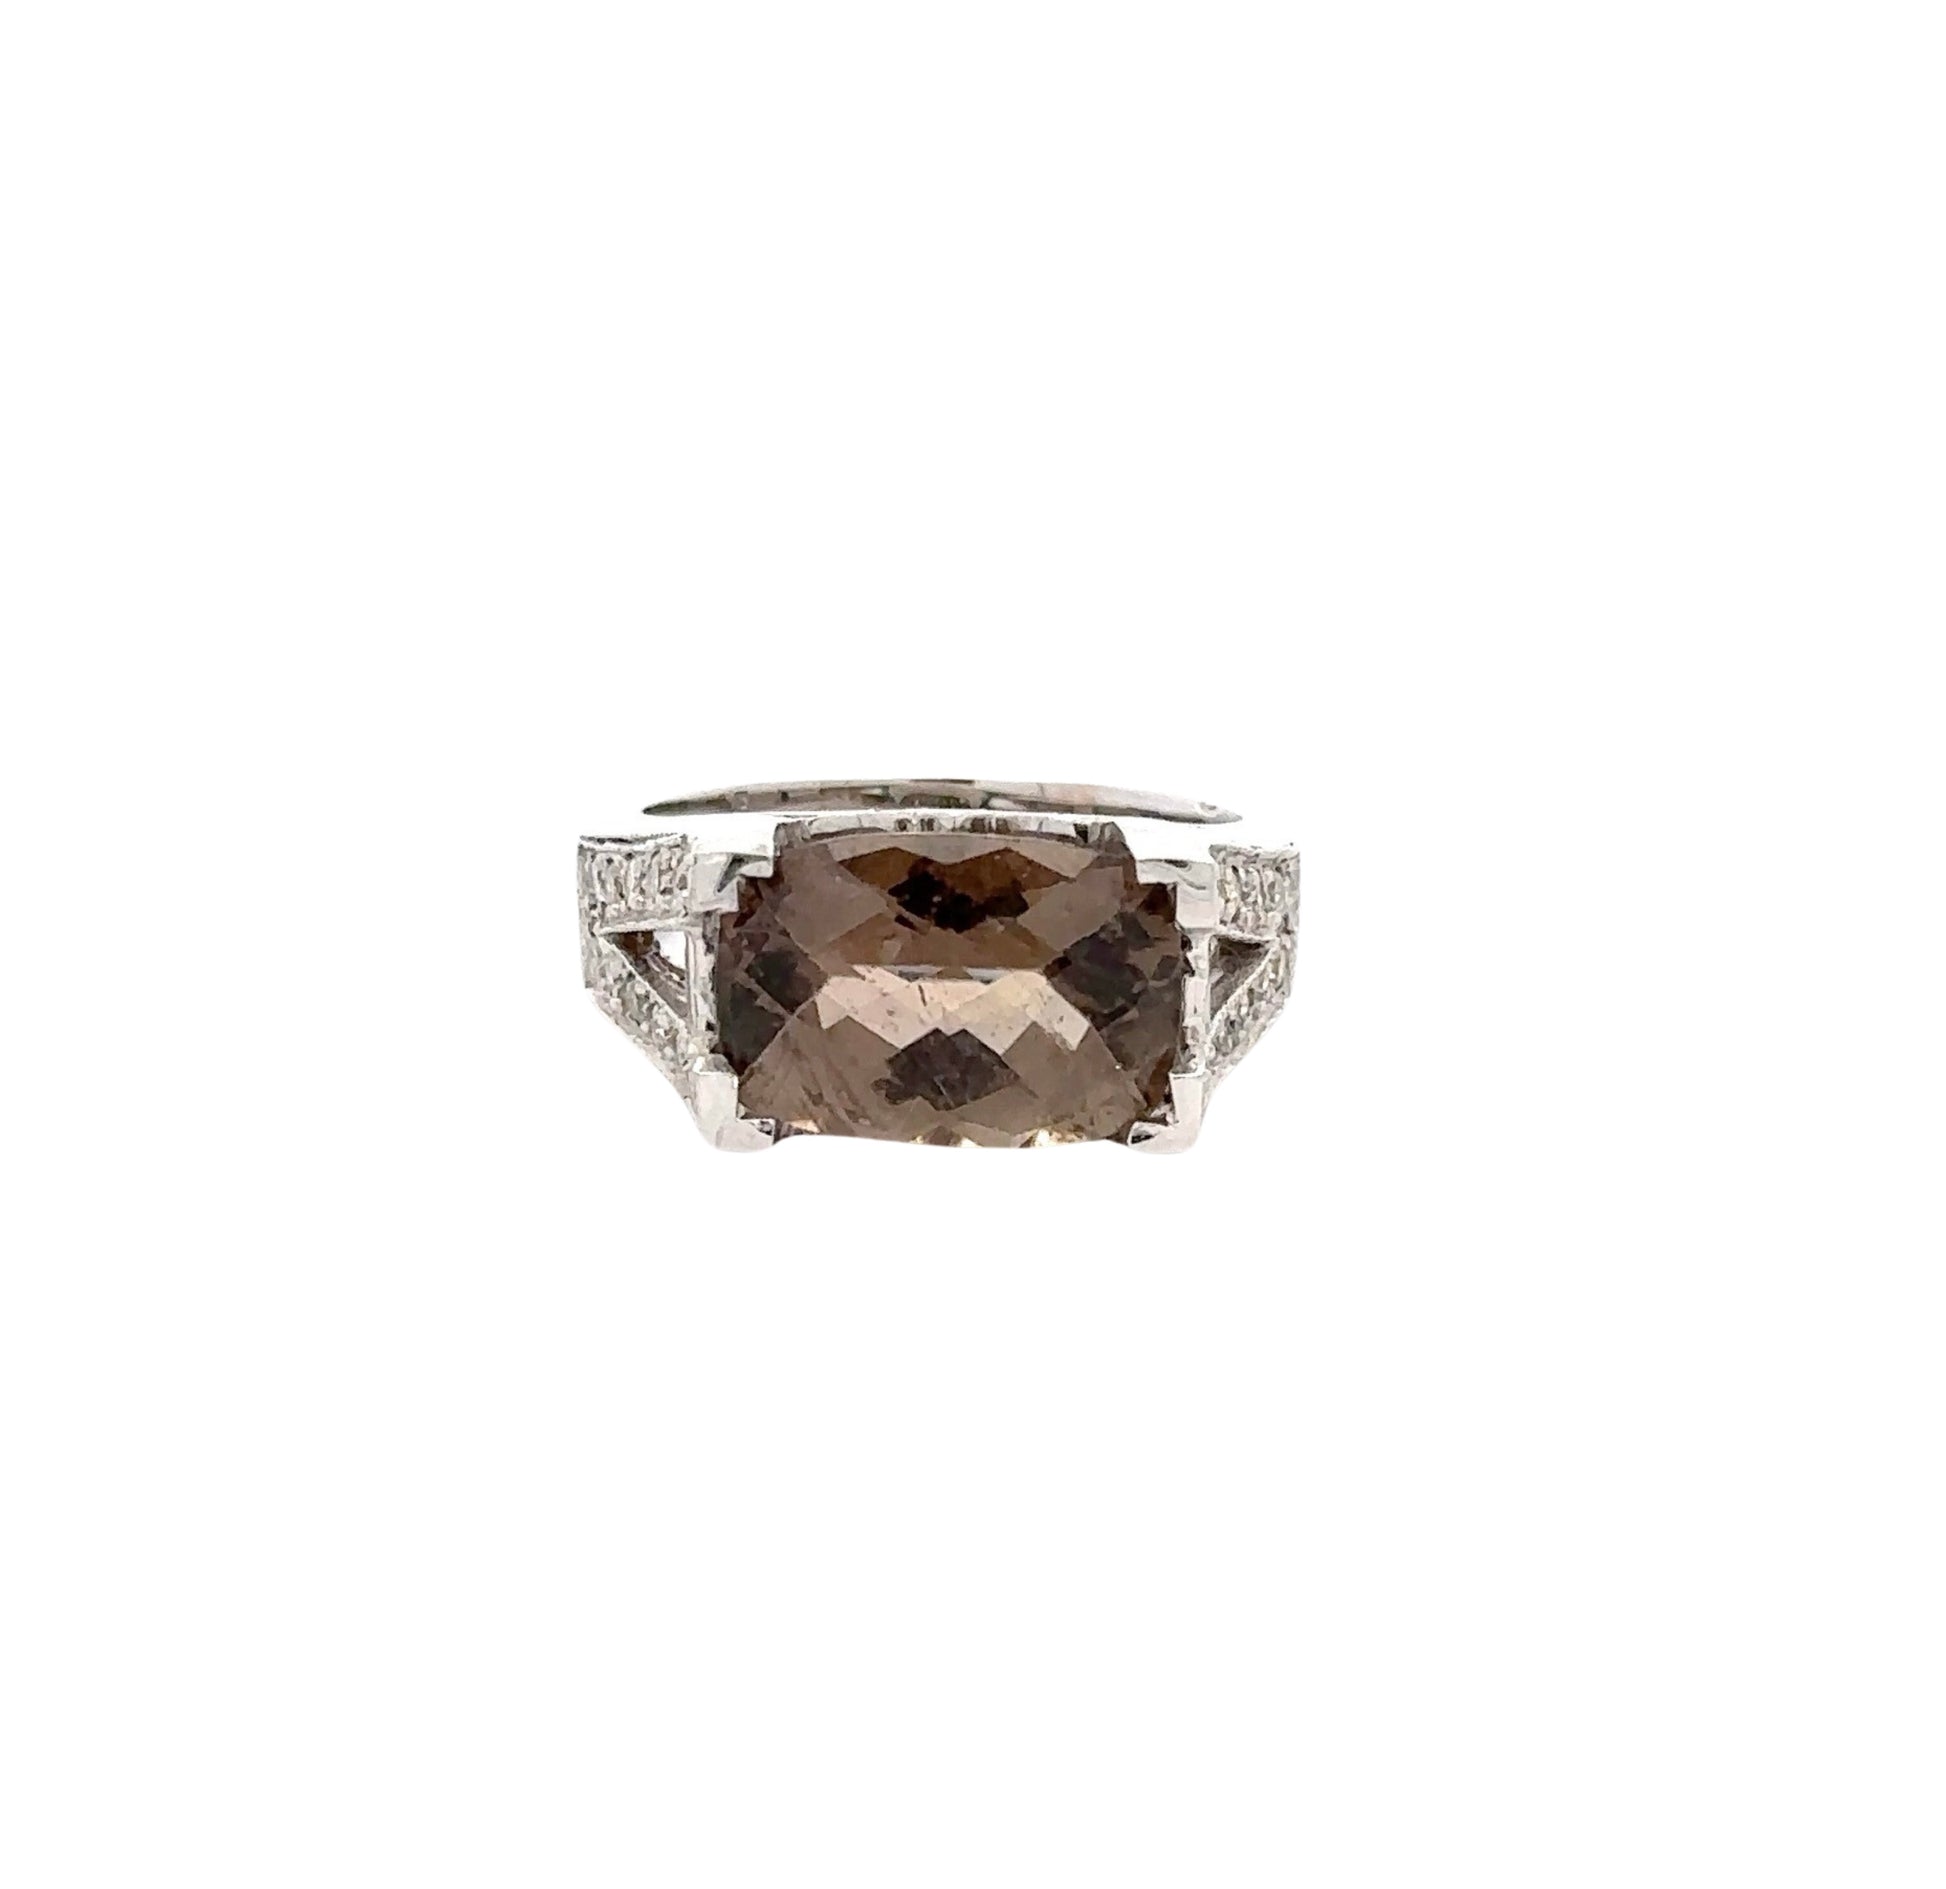 Front of ring with large oval-shaped smoky quartz center and small round diamonds on the band in white gold.